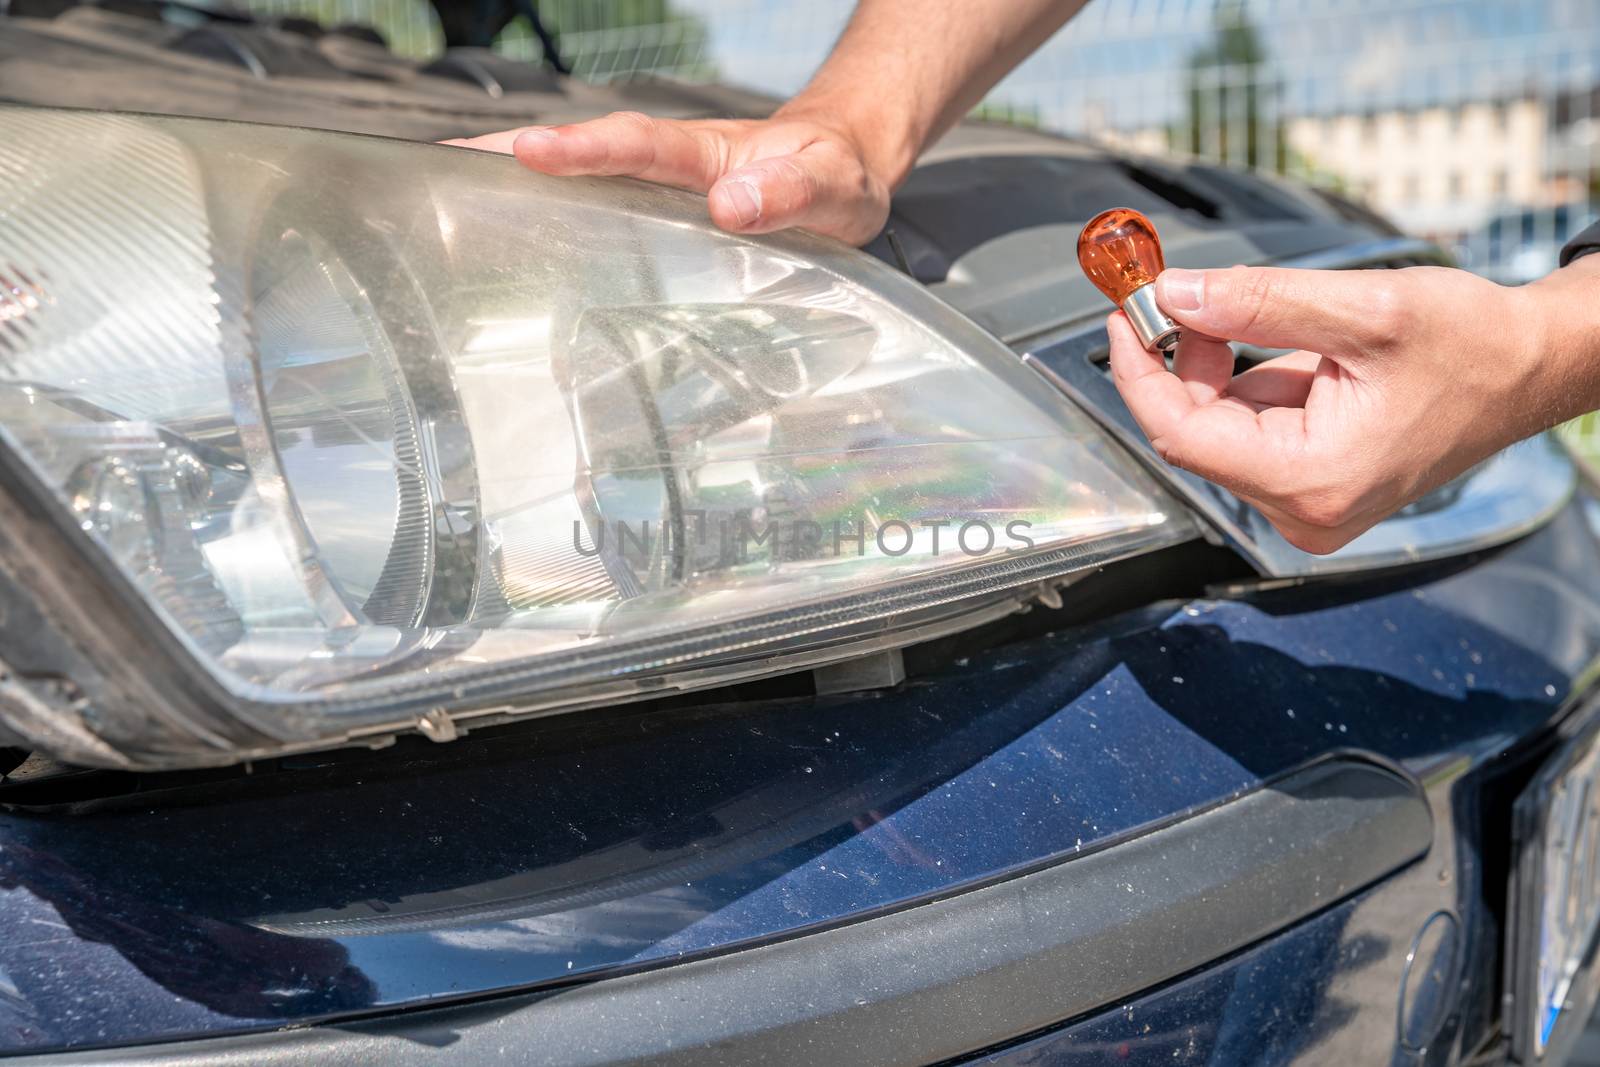 car headlight repair by replacing bad bulbs with new ones by Edophoto